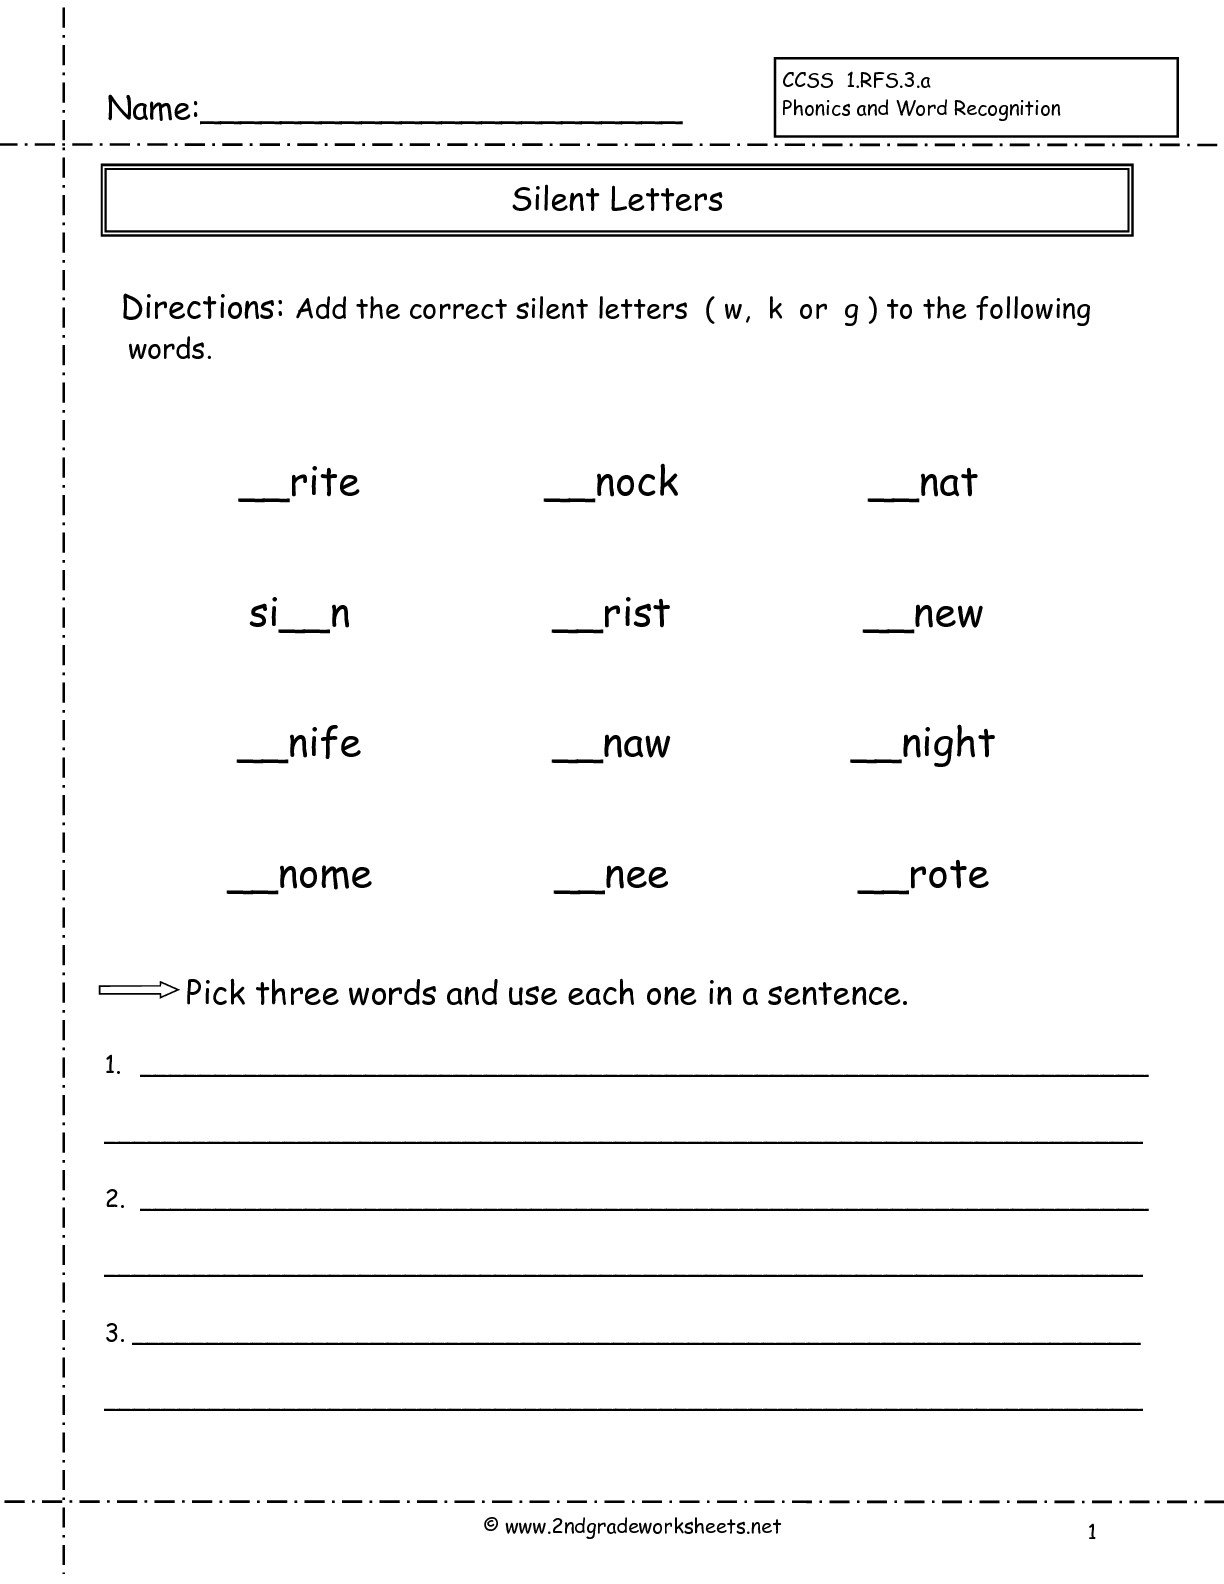 Second Grade Phonics Worksheets And Flashcards Throughout Phonics Worksheets Grade 1